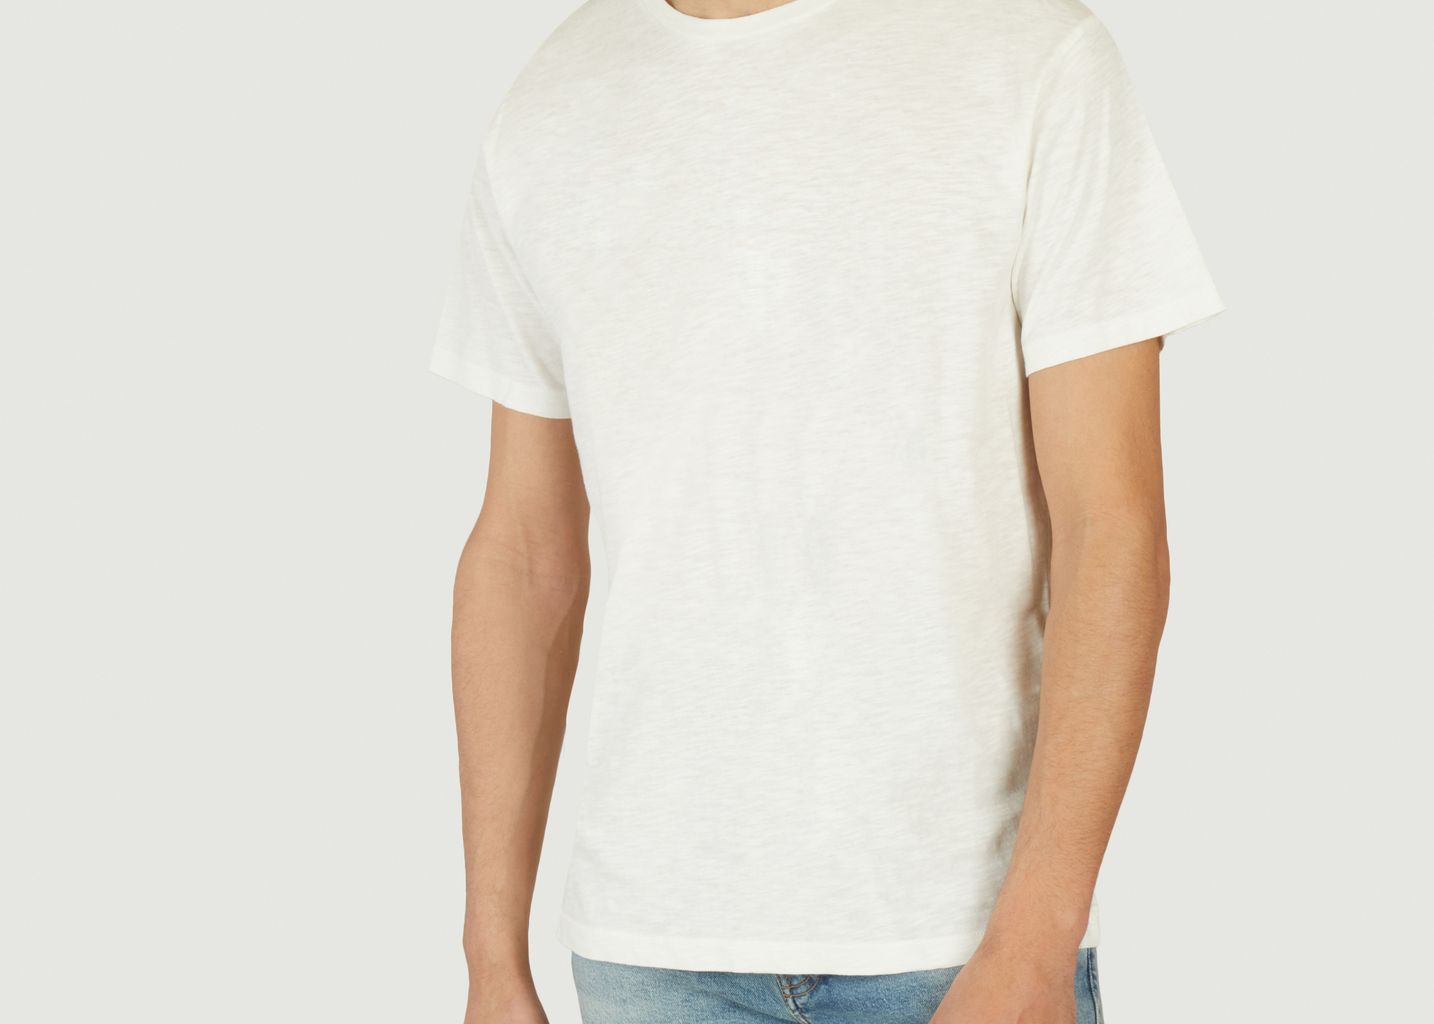 T-Shirt Roffe - Nudie Jeans